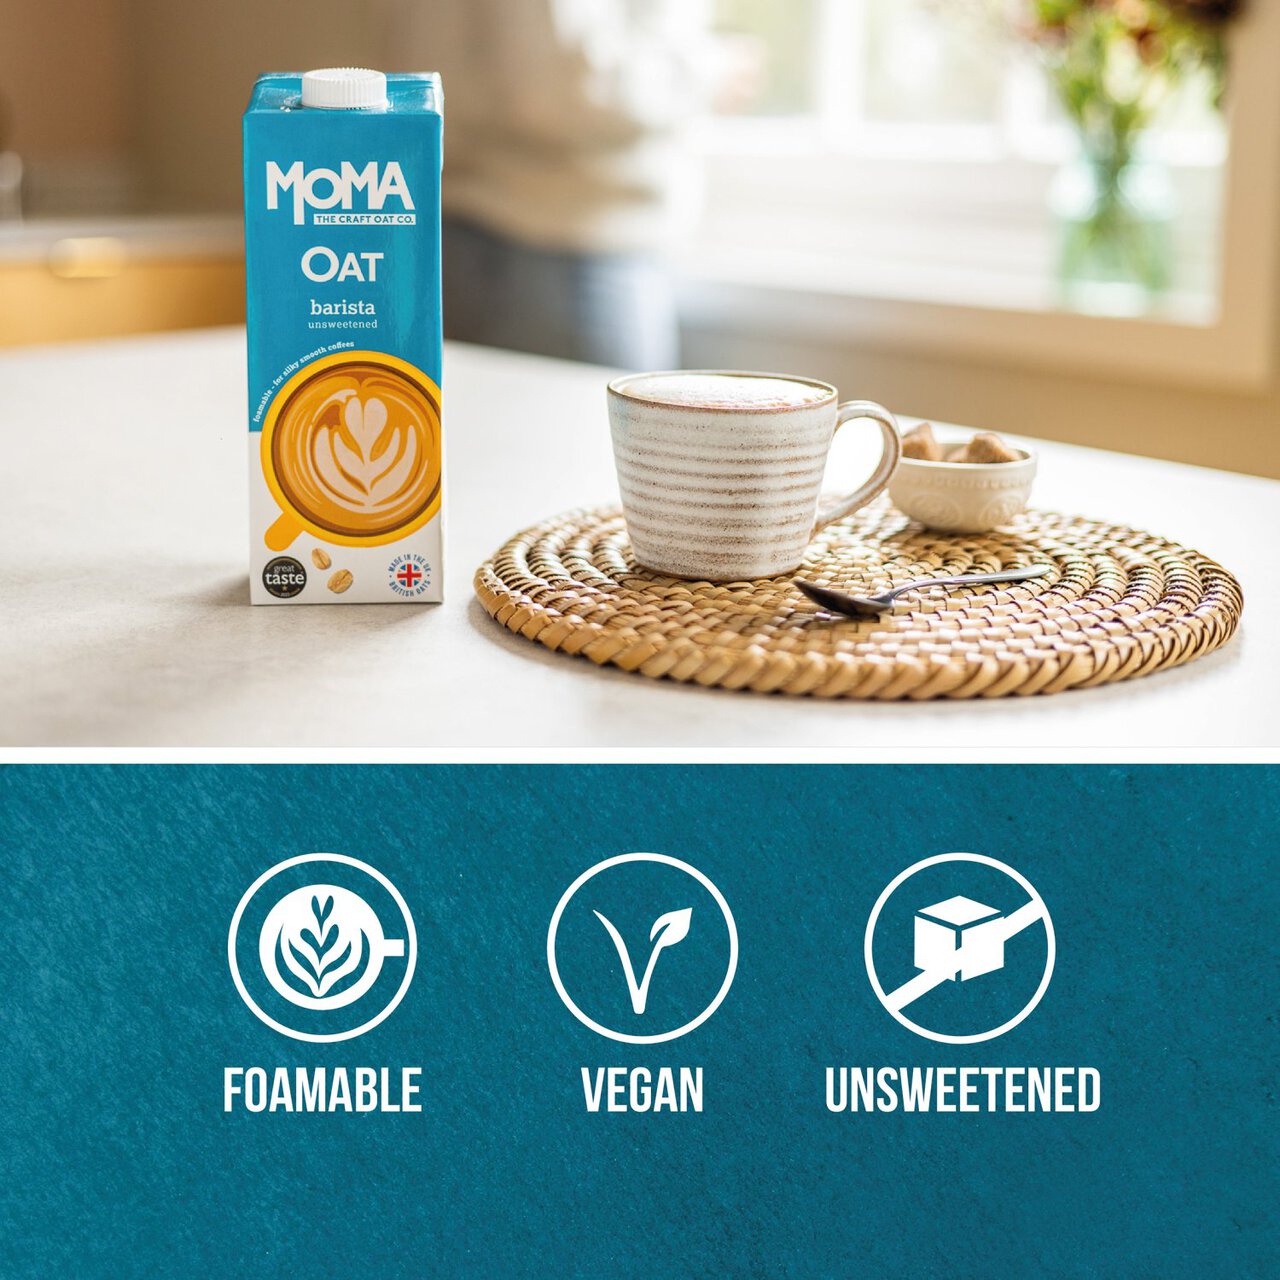 MOMA Barista Oat Drink Unsweetened 1l